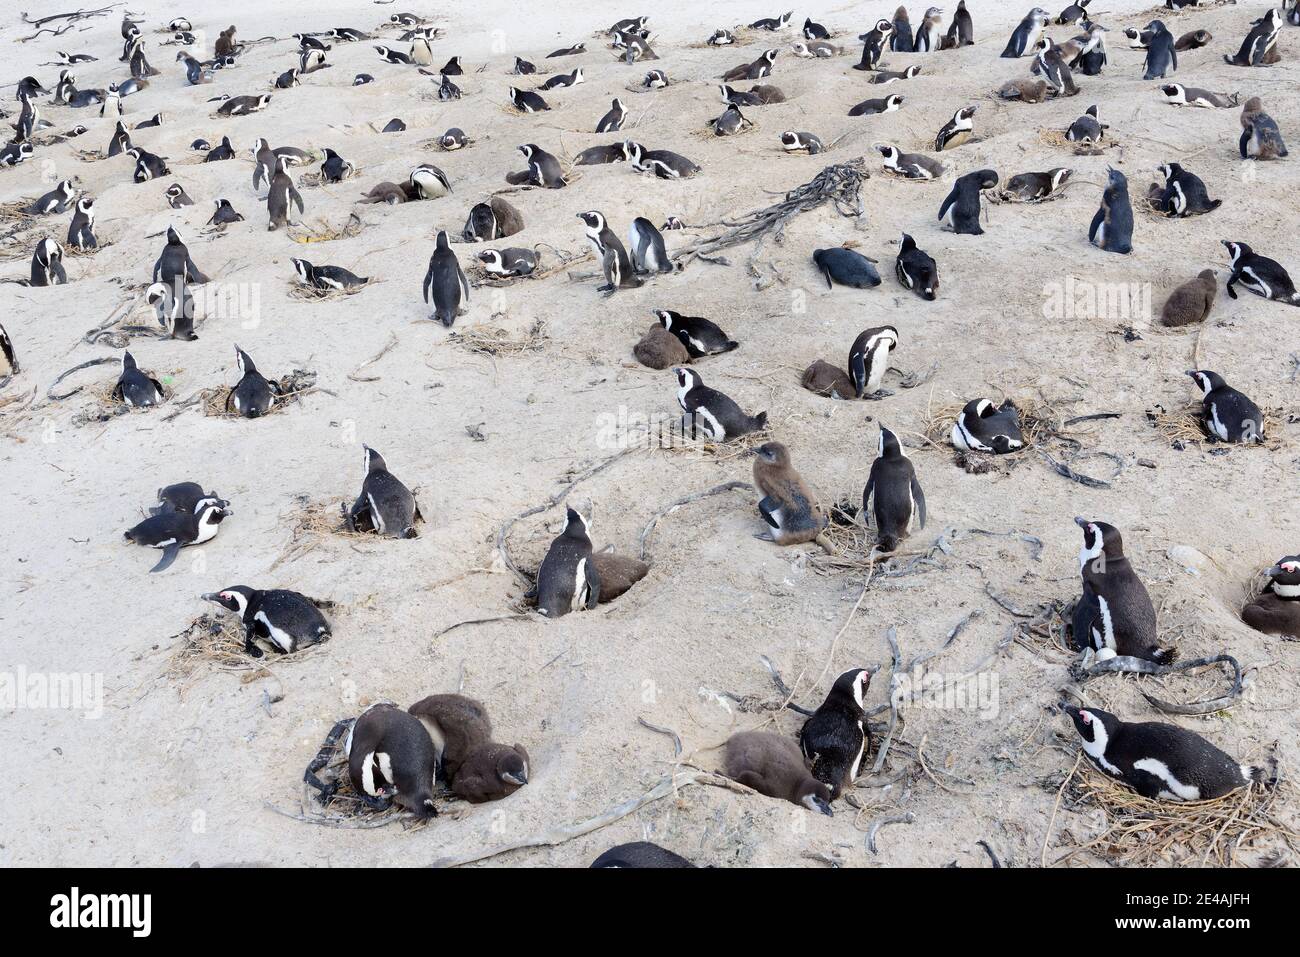 Colony of African penguins (Spheniscus demersus) at the nesting site at the beach, Boulders Beach or Boulders Bay, Simons Town, South Africa, Indian Ocean Stock Photo